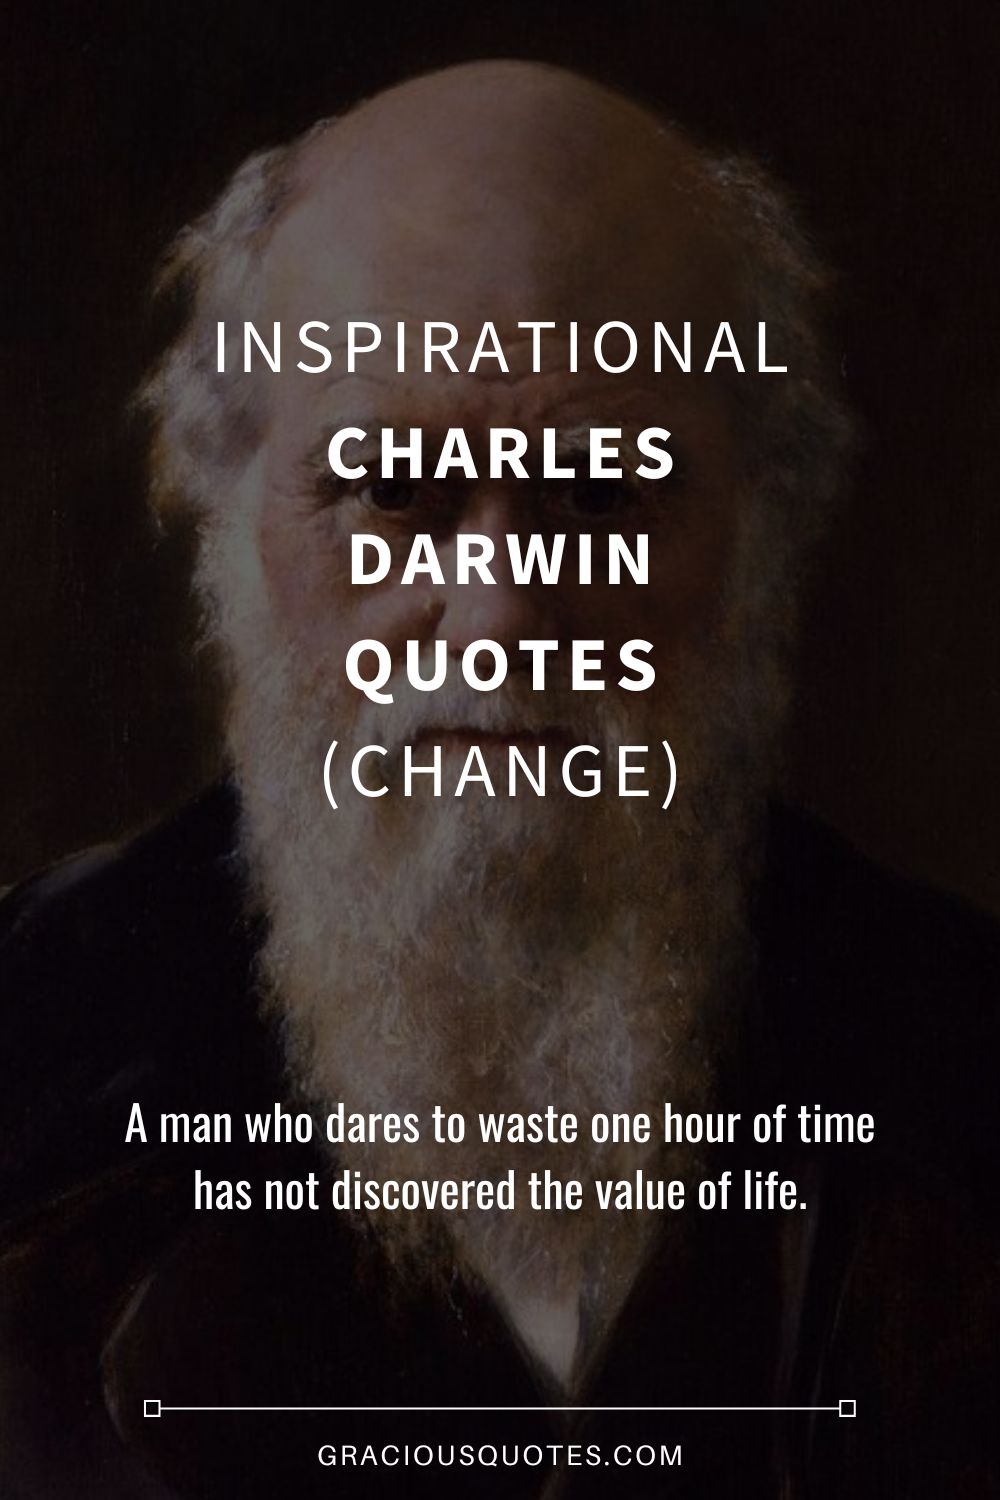 Inspirational Charles Darwin Quotes (CHANGE) - Gracious Quotes